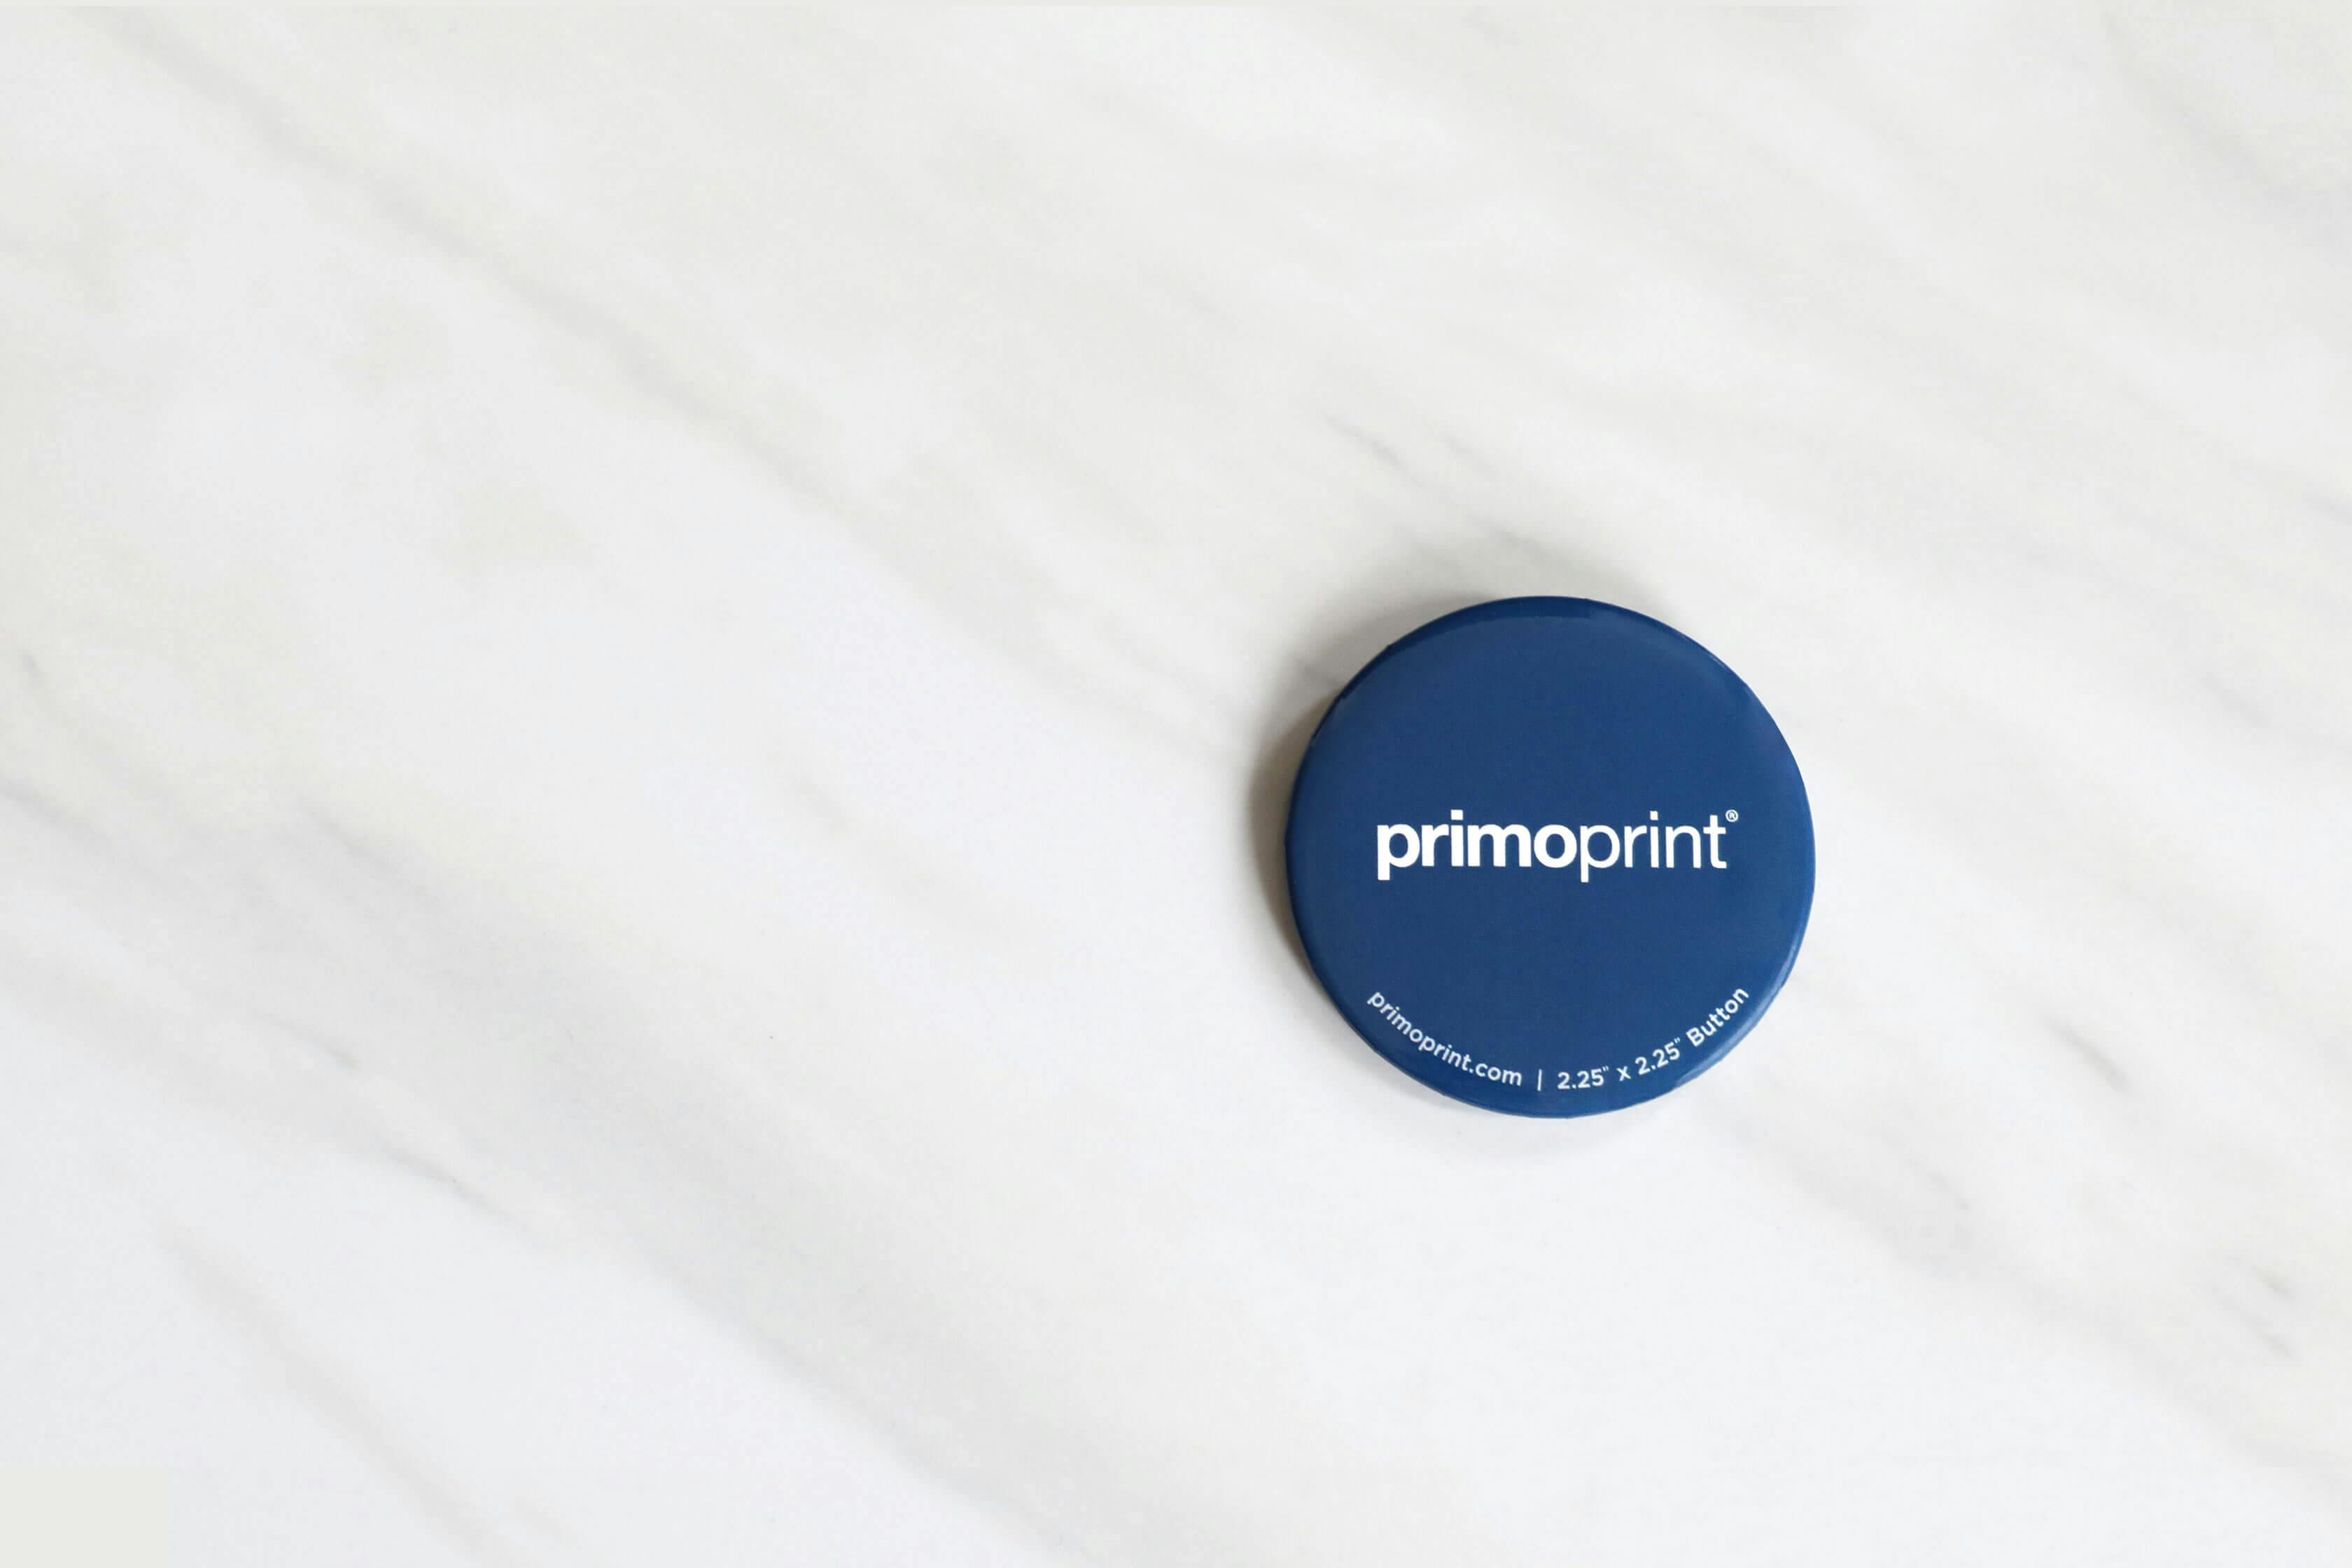 Primoprint Buttons and Magnets